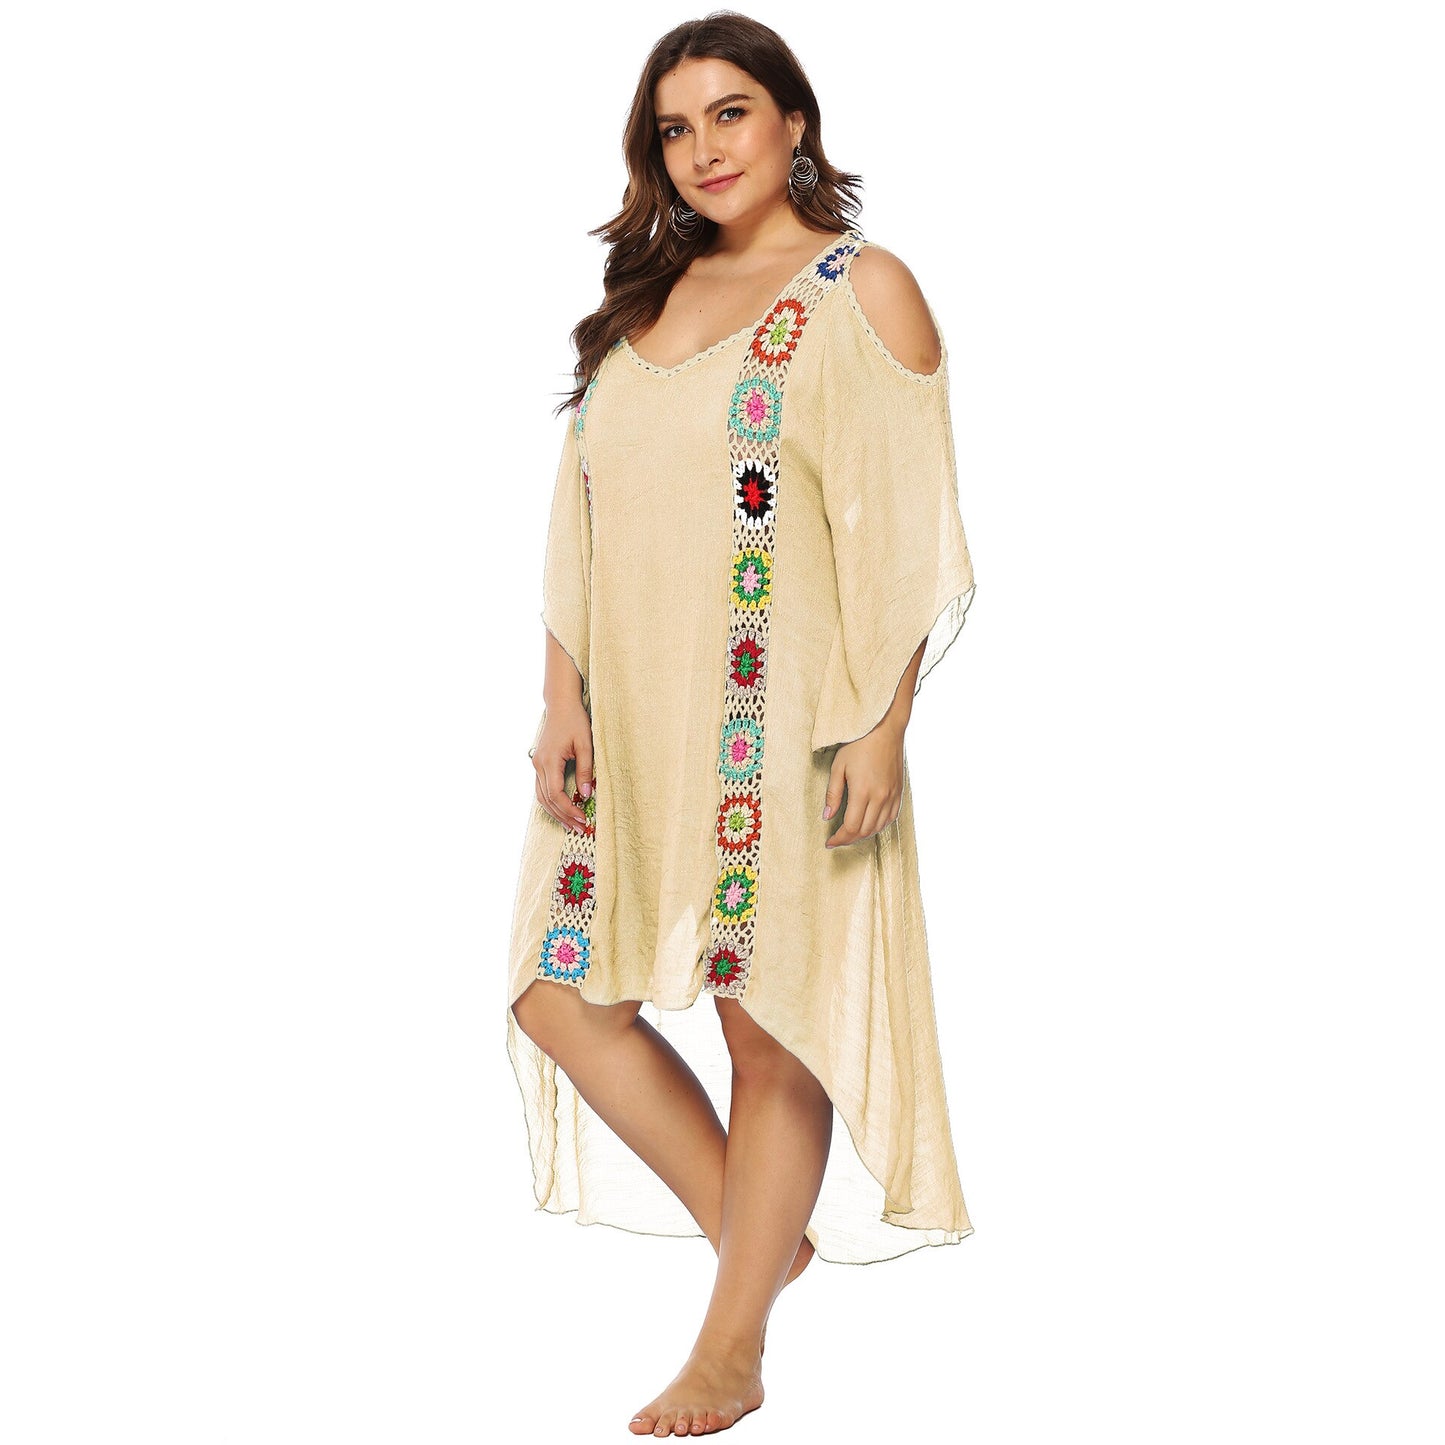 Plus Size Beach Cover-Up